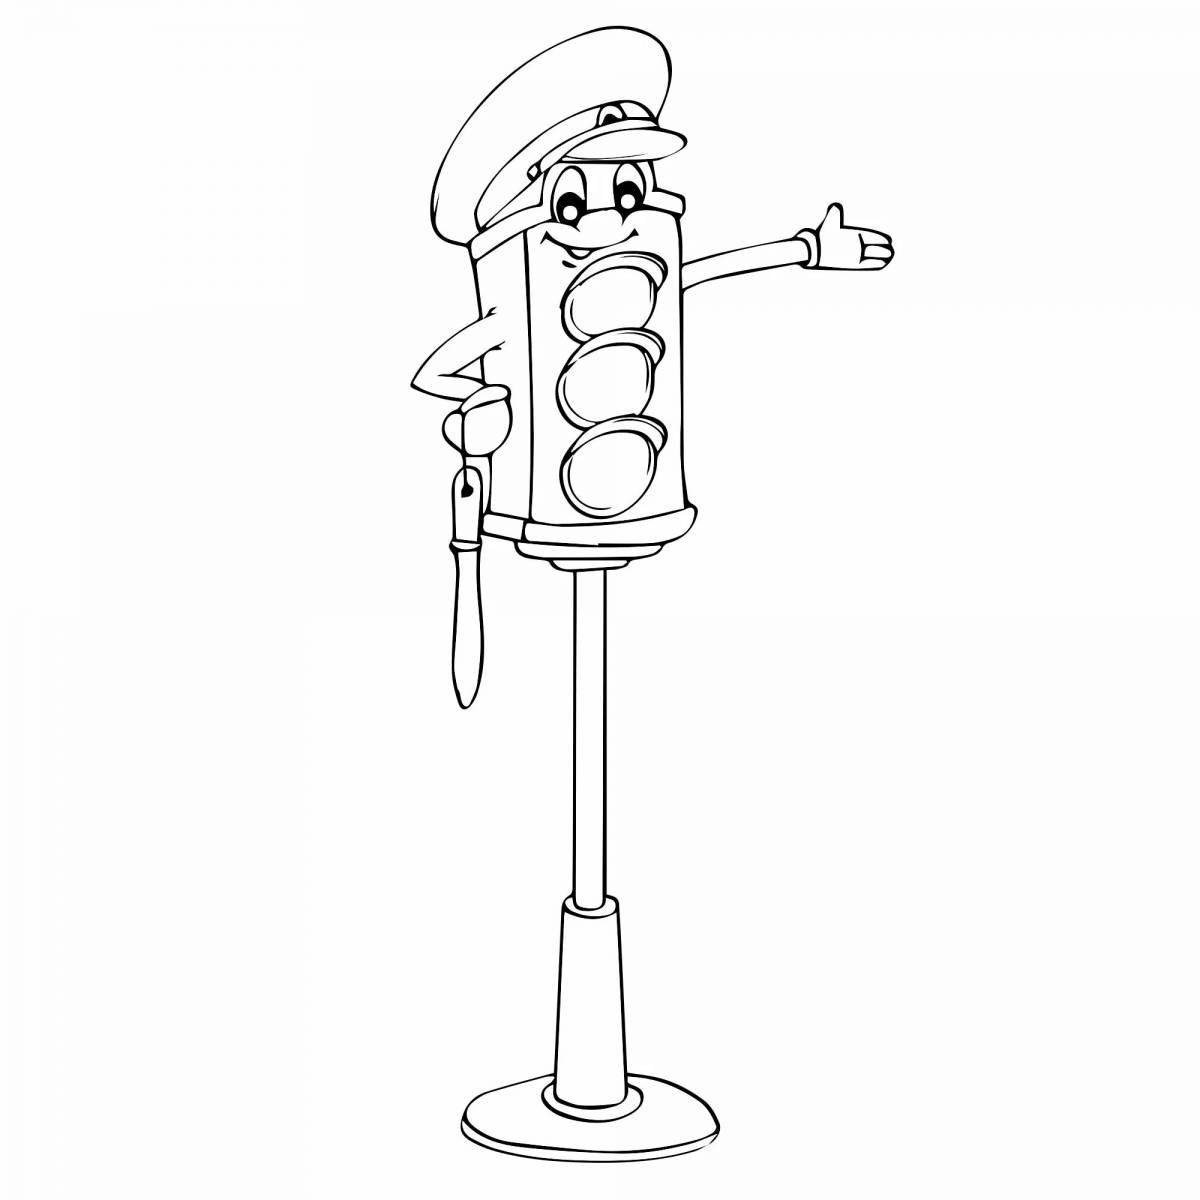 Tempting traffic light coloring page for kids